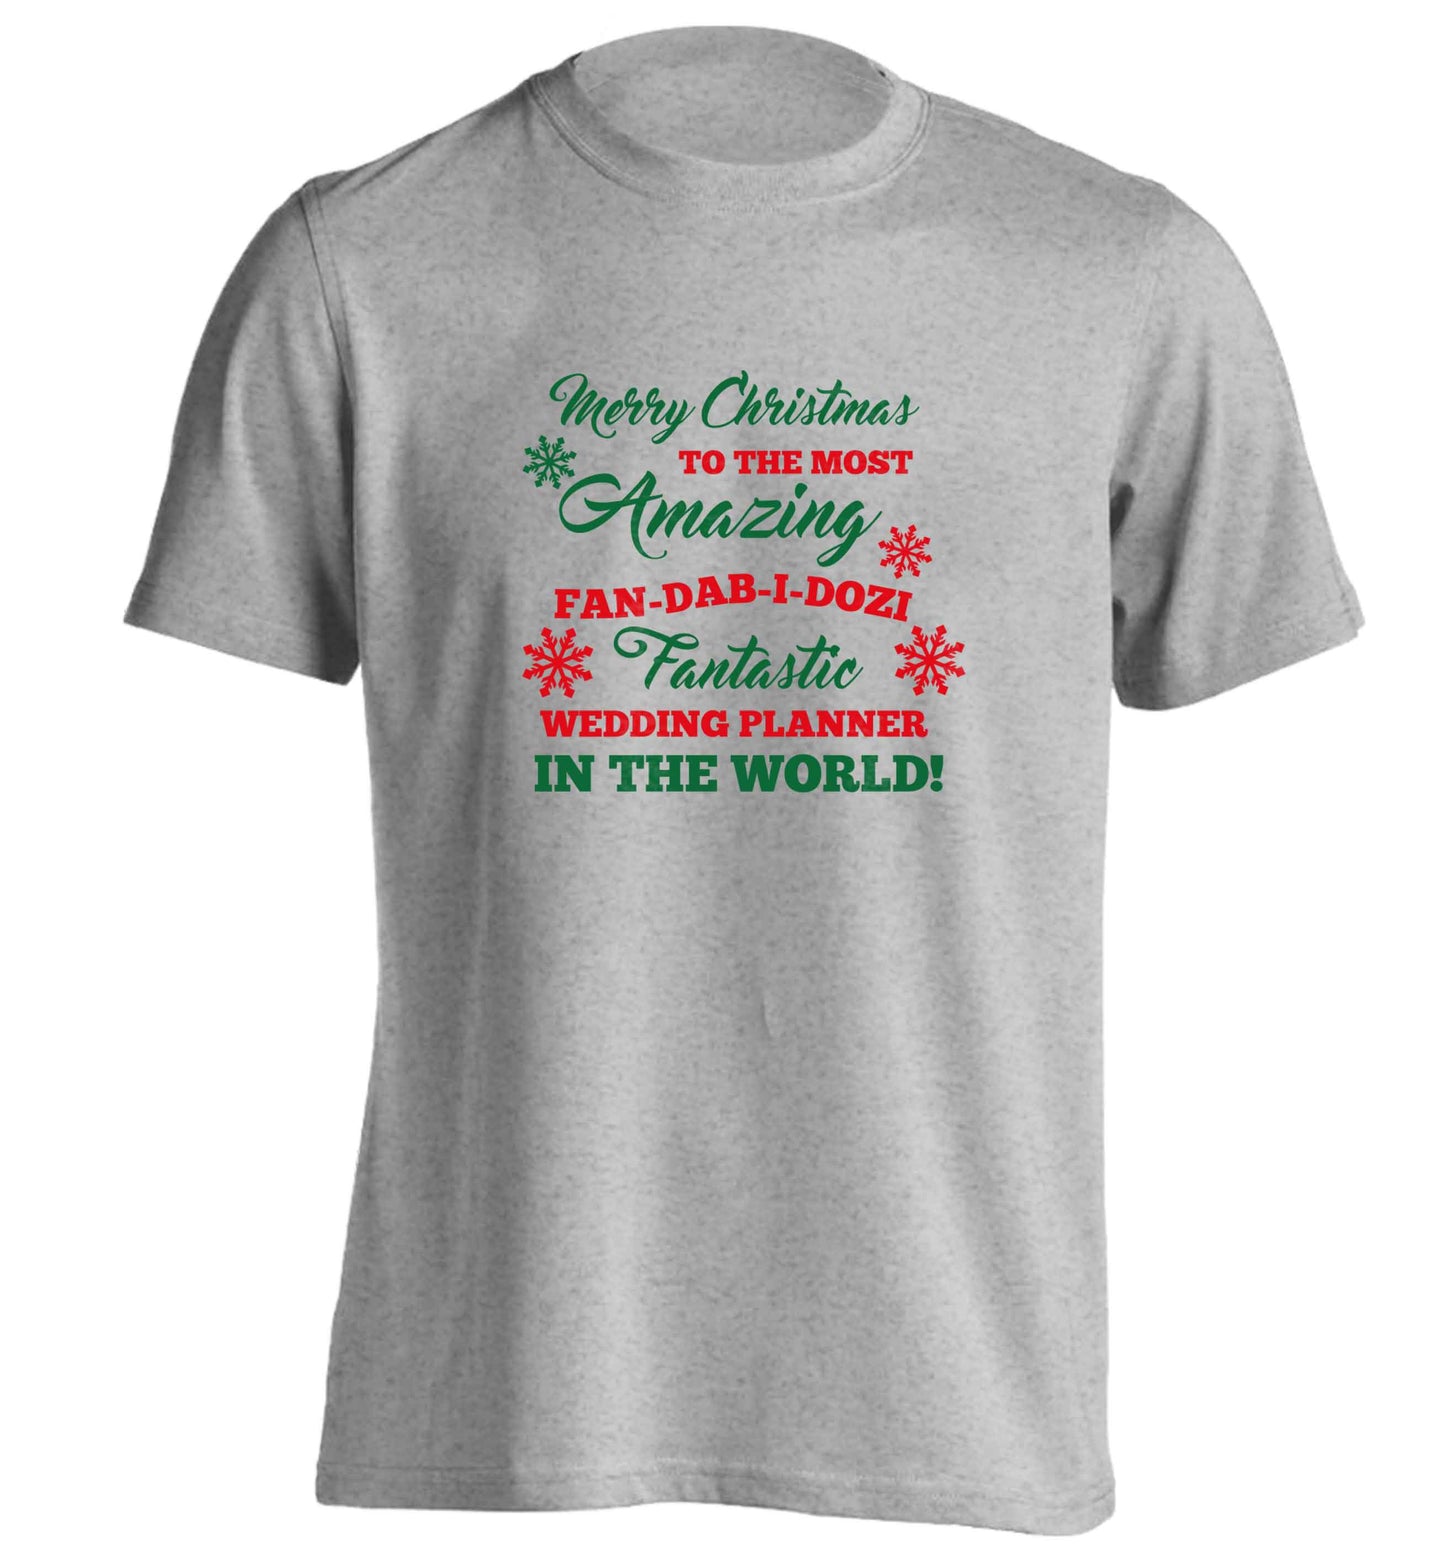 Merry Christmas to the most amazing fan-dab-i-dozi fantasic wedding planner in the world adults unisex grey Tshirt 2XL